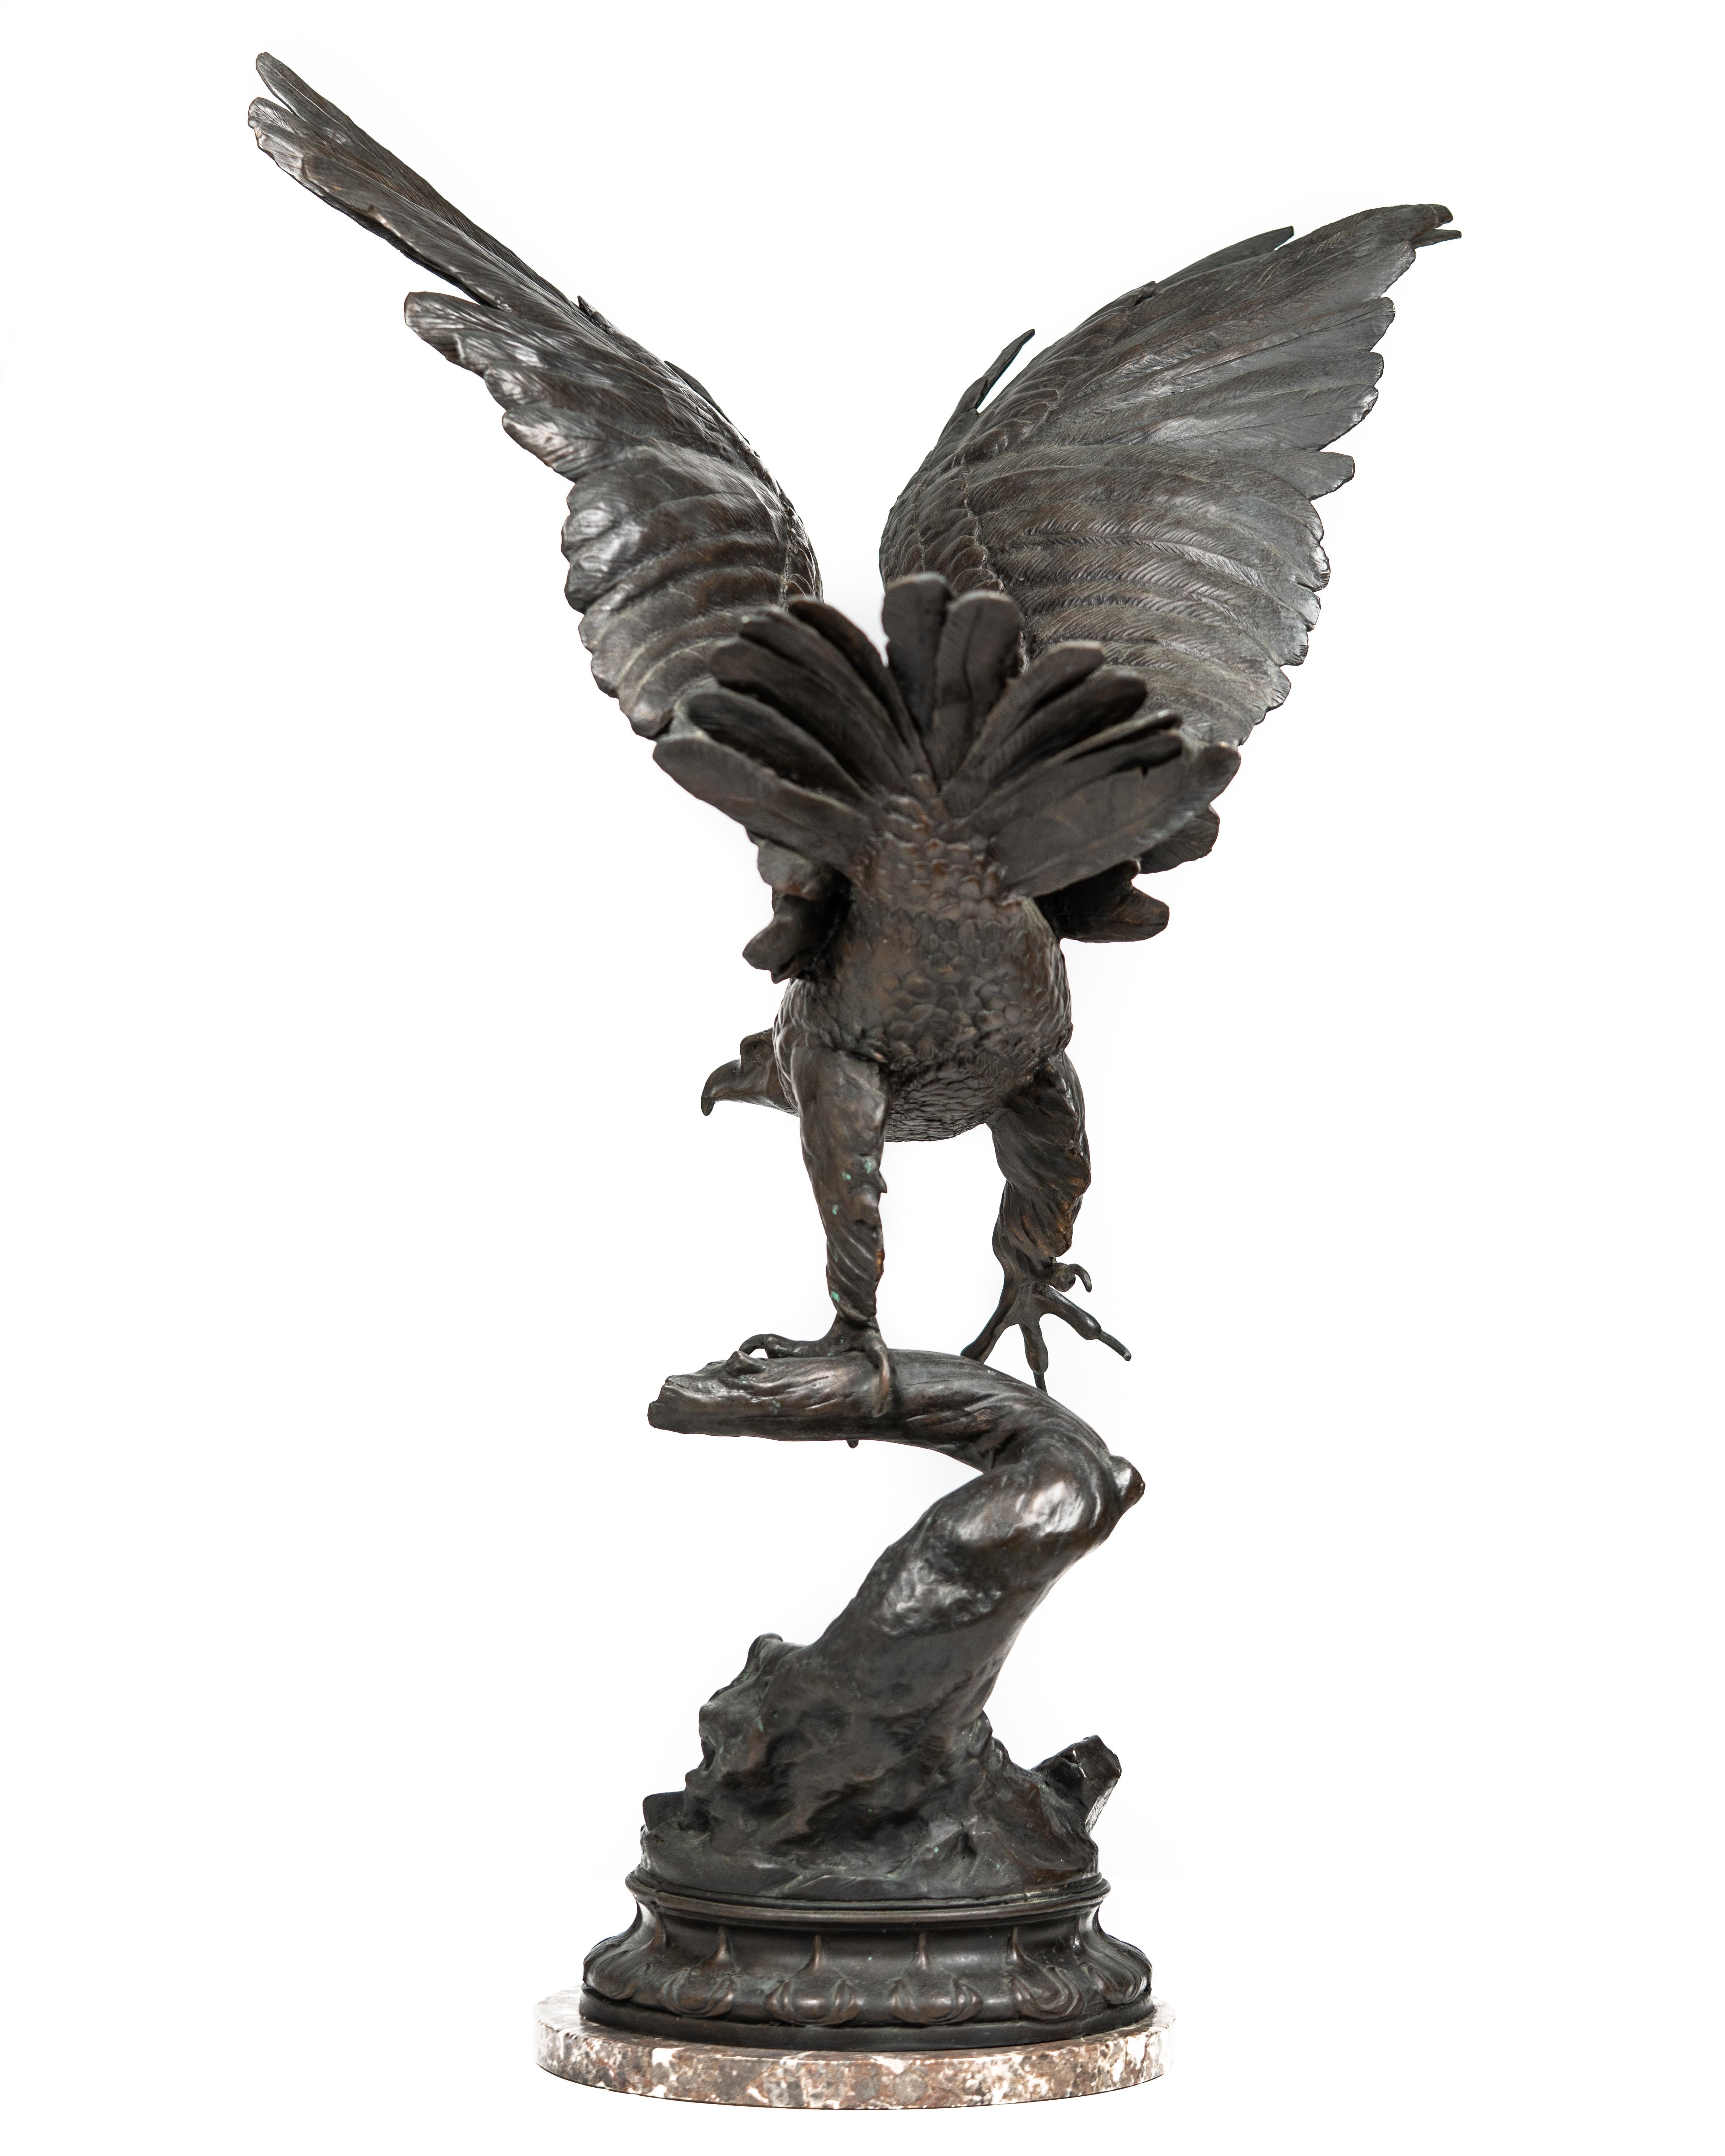 Jules Moigniez, (French, 1835-1894) bronze sculpture of an eagle on marble base. Signed to base of bronze, J. Moigniez.